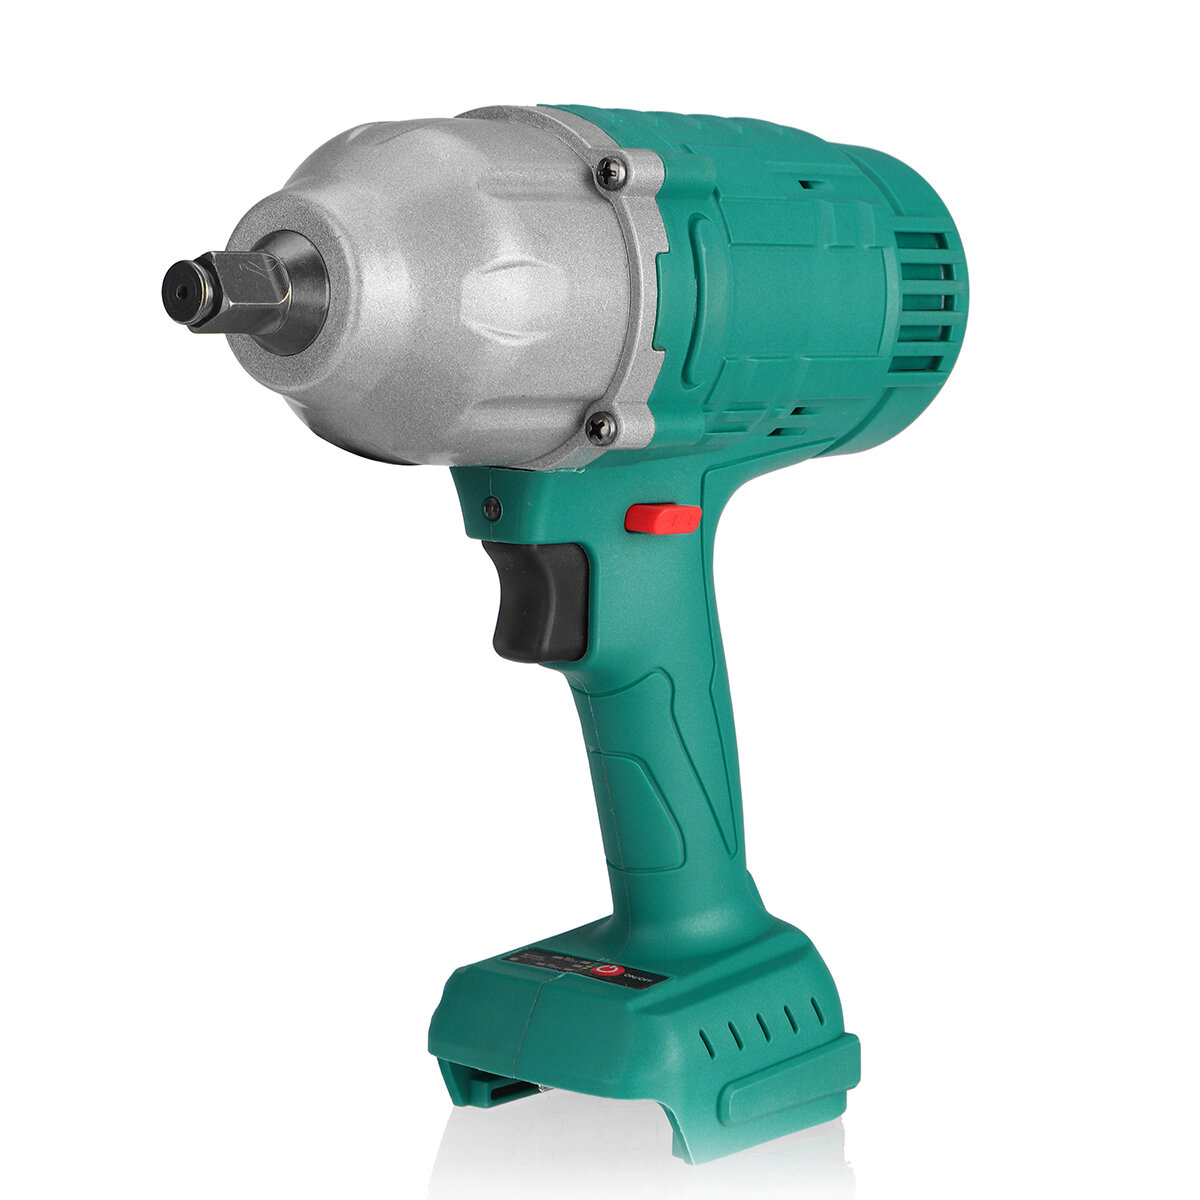 Image of BLMIATKO 18V 1900Nm Electric Brushless Impact Wrench Rechargeable Woodworking Maintenance Tool